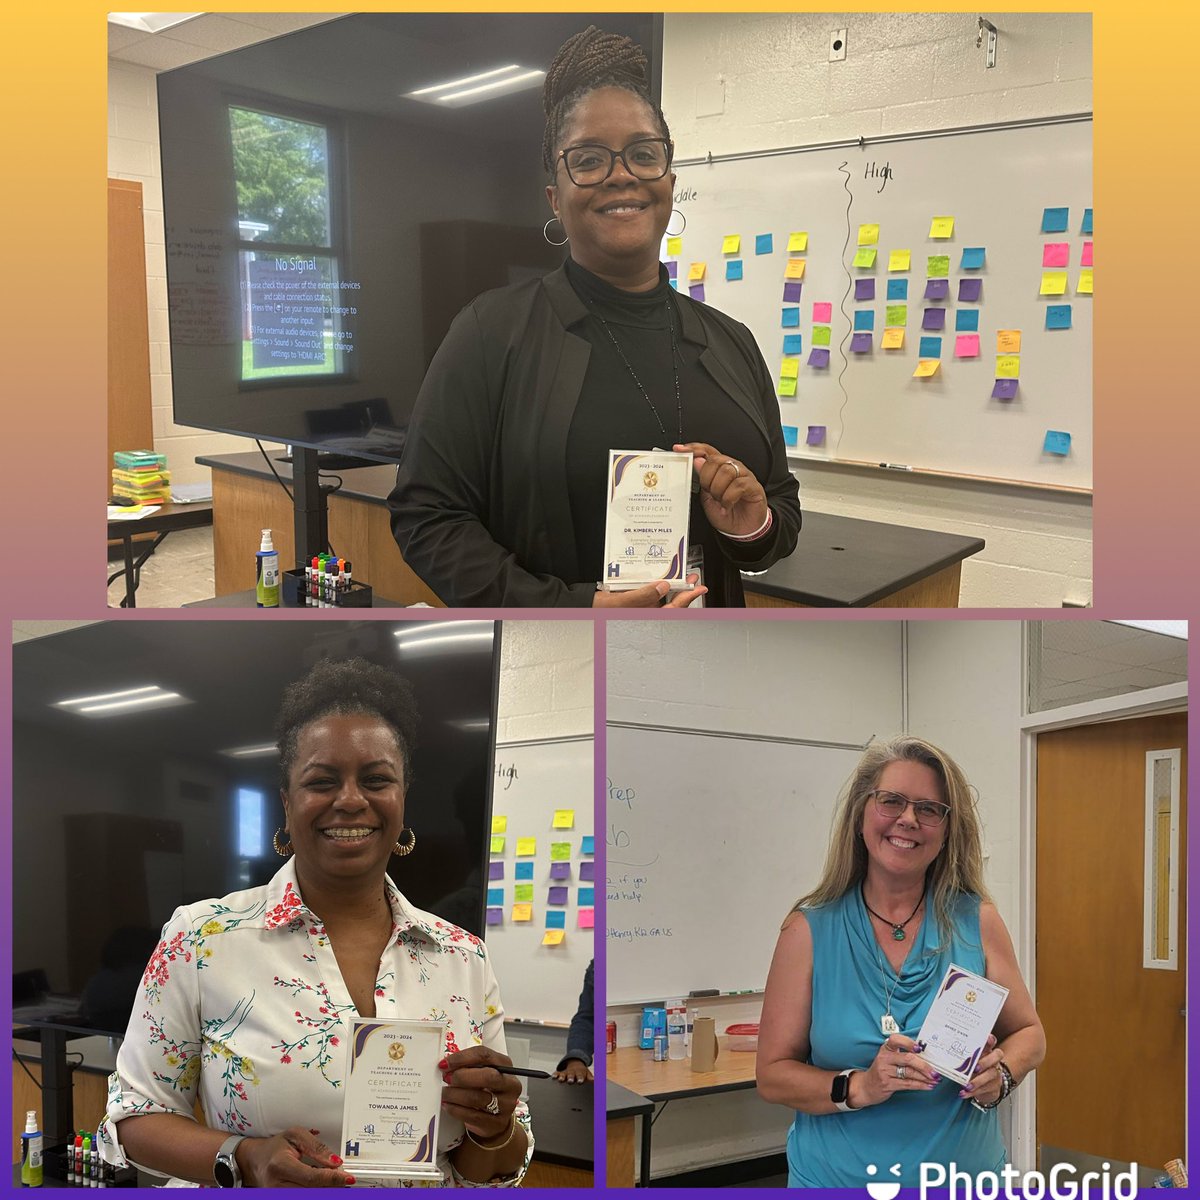 The Teaching & Learning team’s 2 day retreat concluded with a Closing Ceremony acknowledging the contributions of every team member. (Not pictured - Brandi & Michelle) We are committed to #CreatingSPACE and #GrowingTogether @DrMilesk31 @DawnAndersonHCS @AkbarEducates